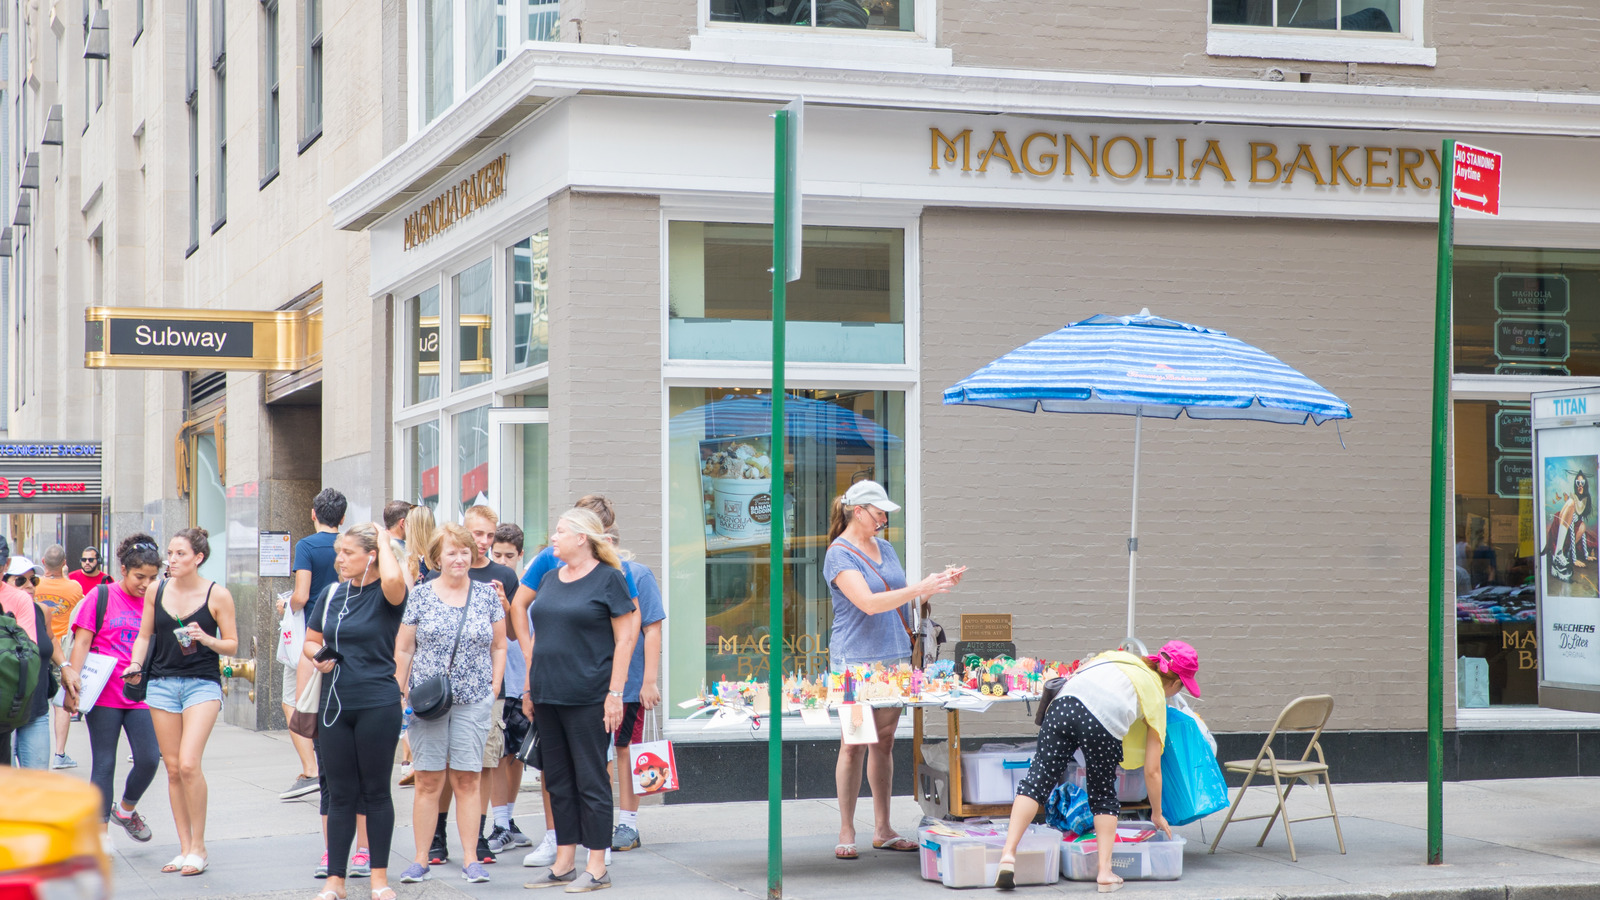 https://www.mashed.com/img/gallery/the-cake-pans-magnolia-bakery-uses-for-every-cake/l-intro-1672161829.jpg